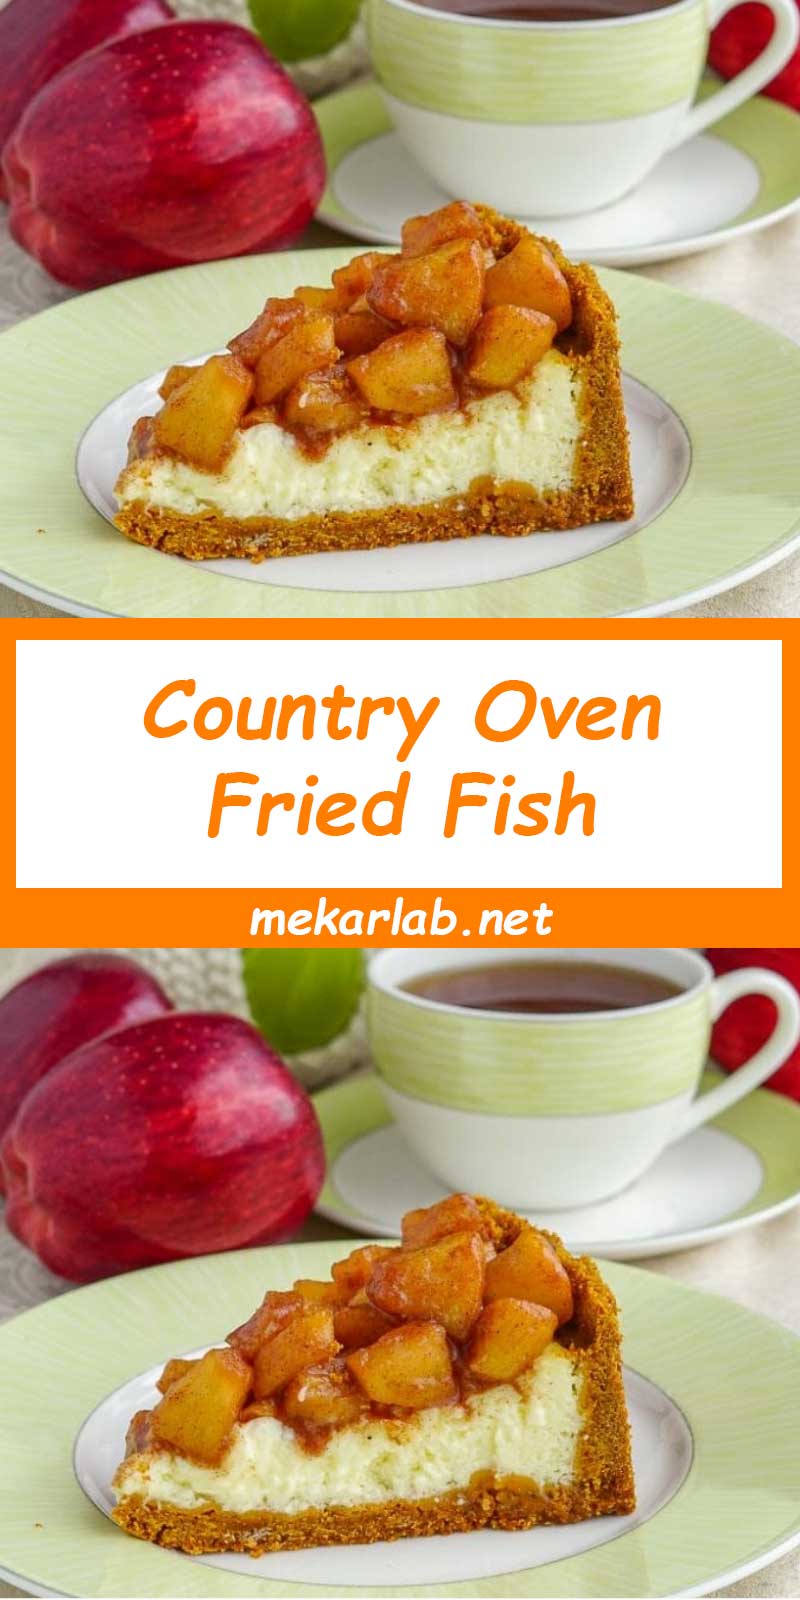 Country Oven Fried Fish